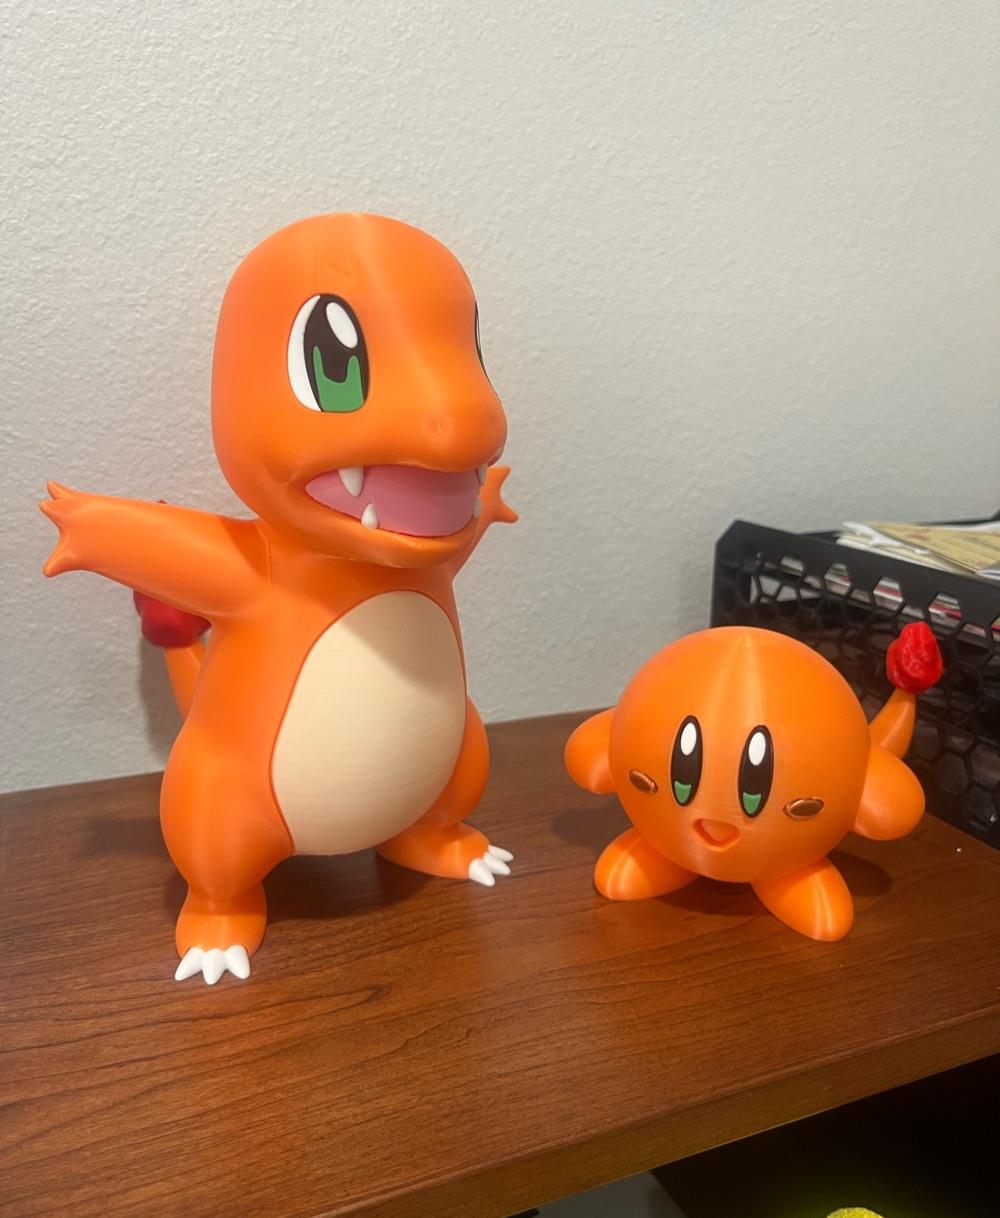 Charmander Pokemon - Multipart - I printed it out at 170% as big, as my print bed would allow. It turned out good. I probably should have increased the insert parts another couple percent to get a snugger fit but happy with the result.

Orange: Elegoo Rapid PLA Plus Orange
Green: Overture PLA Plus Green
Pink: Elegoo PLA Pink
White: Elegoo PLA White
Black: Overture Easy PLA Black
Tan: Ziro PLA Pro Skin
Red: Overture PLA Red - 3d model